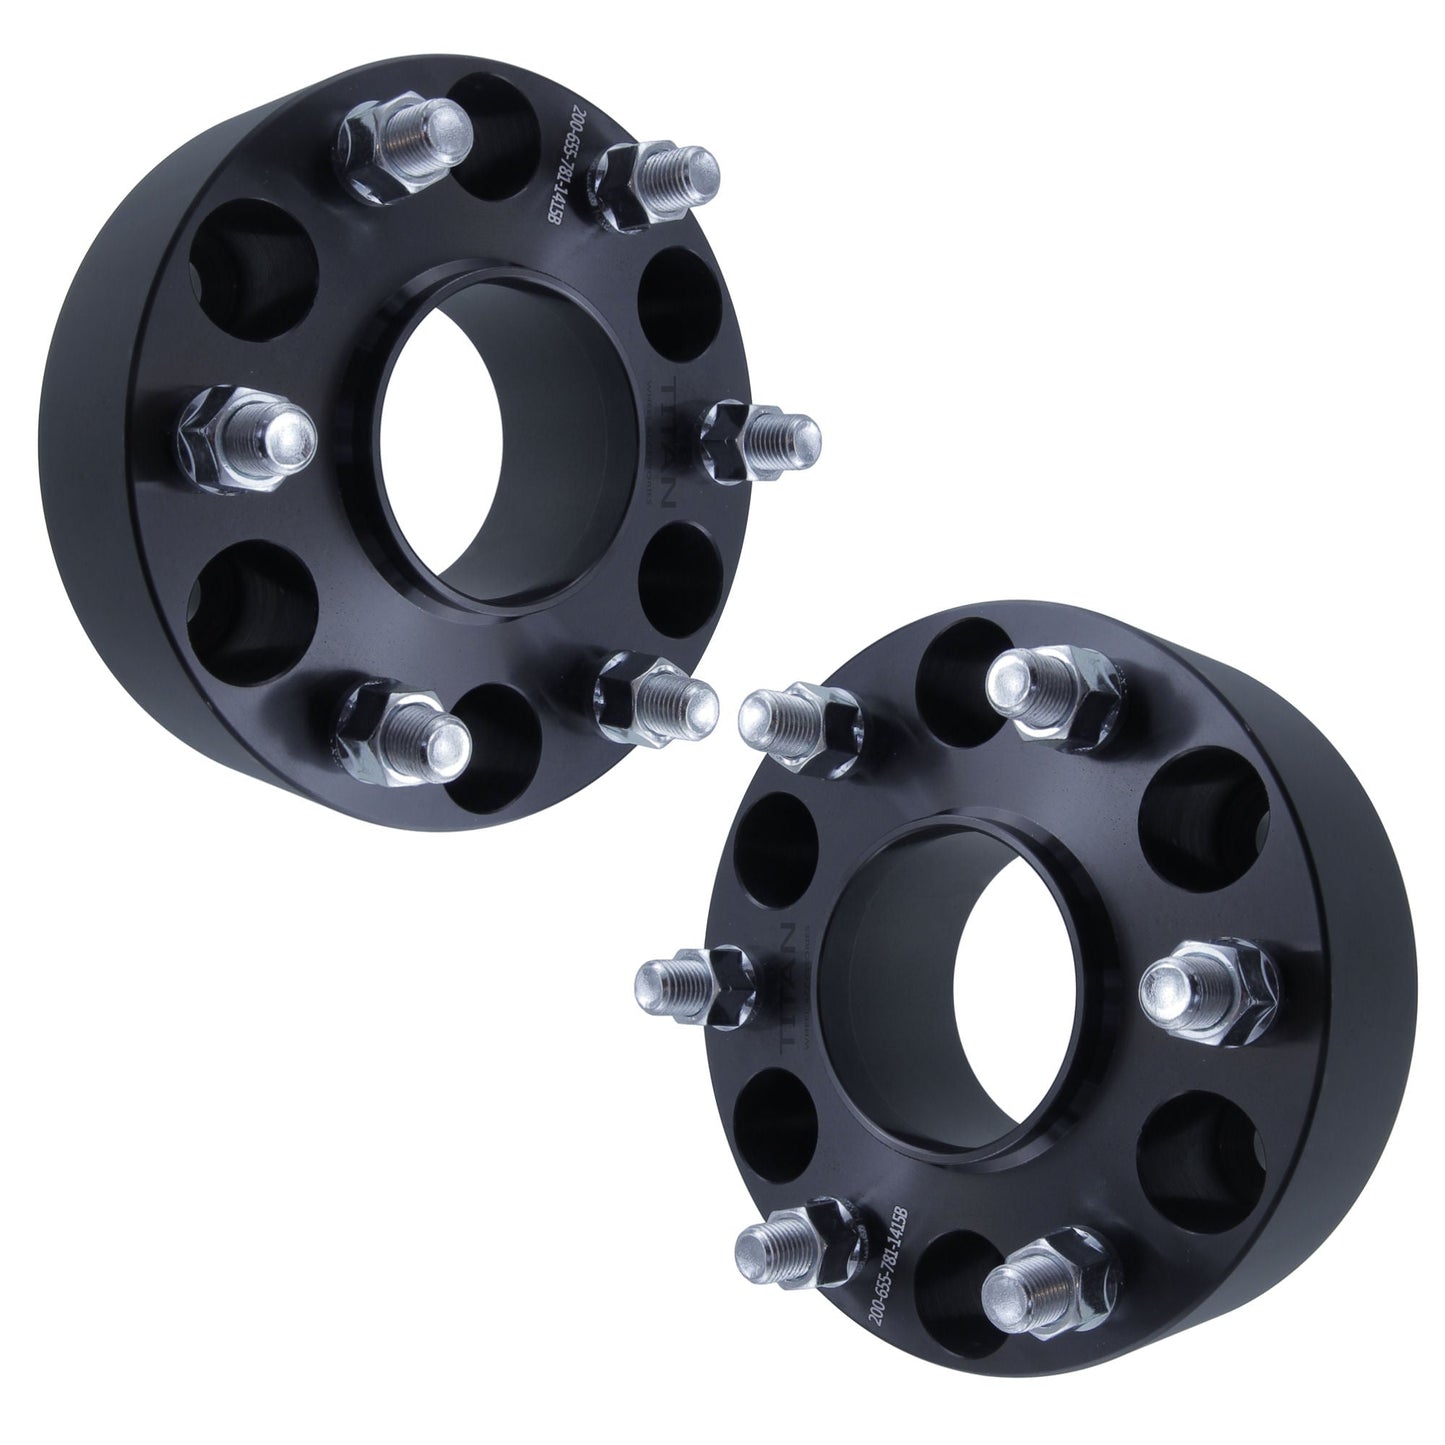 2" (50mm) Titan Wheel Spacers for Chevy Silverado Tahoe Avalanche Suburban | 6x5.5 (6x139.7) | 78.1 Hubcentric |14x1.5 Studs |  Set of 4 | Titan Wheel Accessories